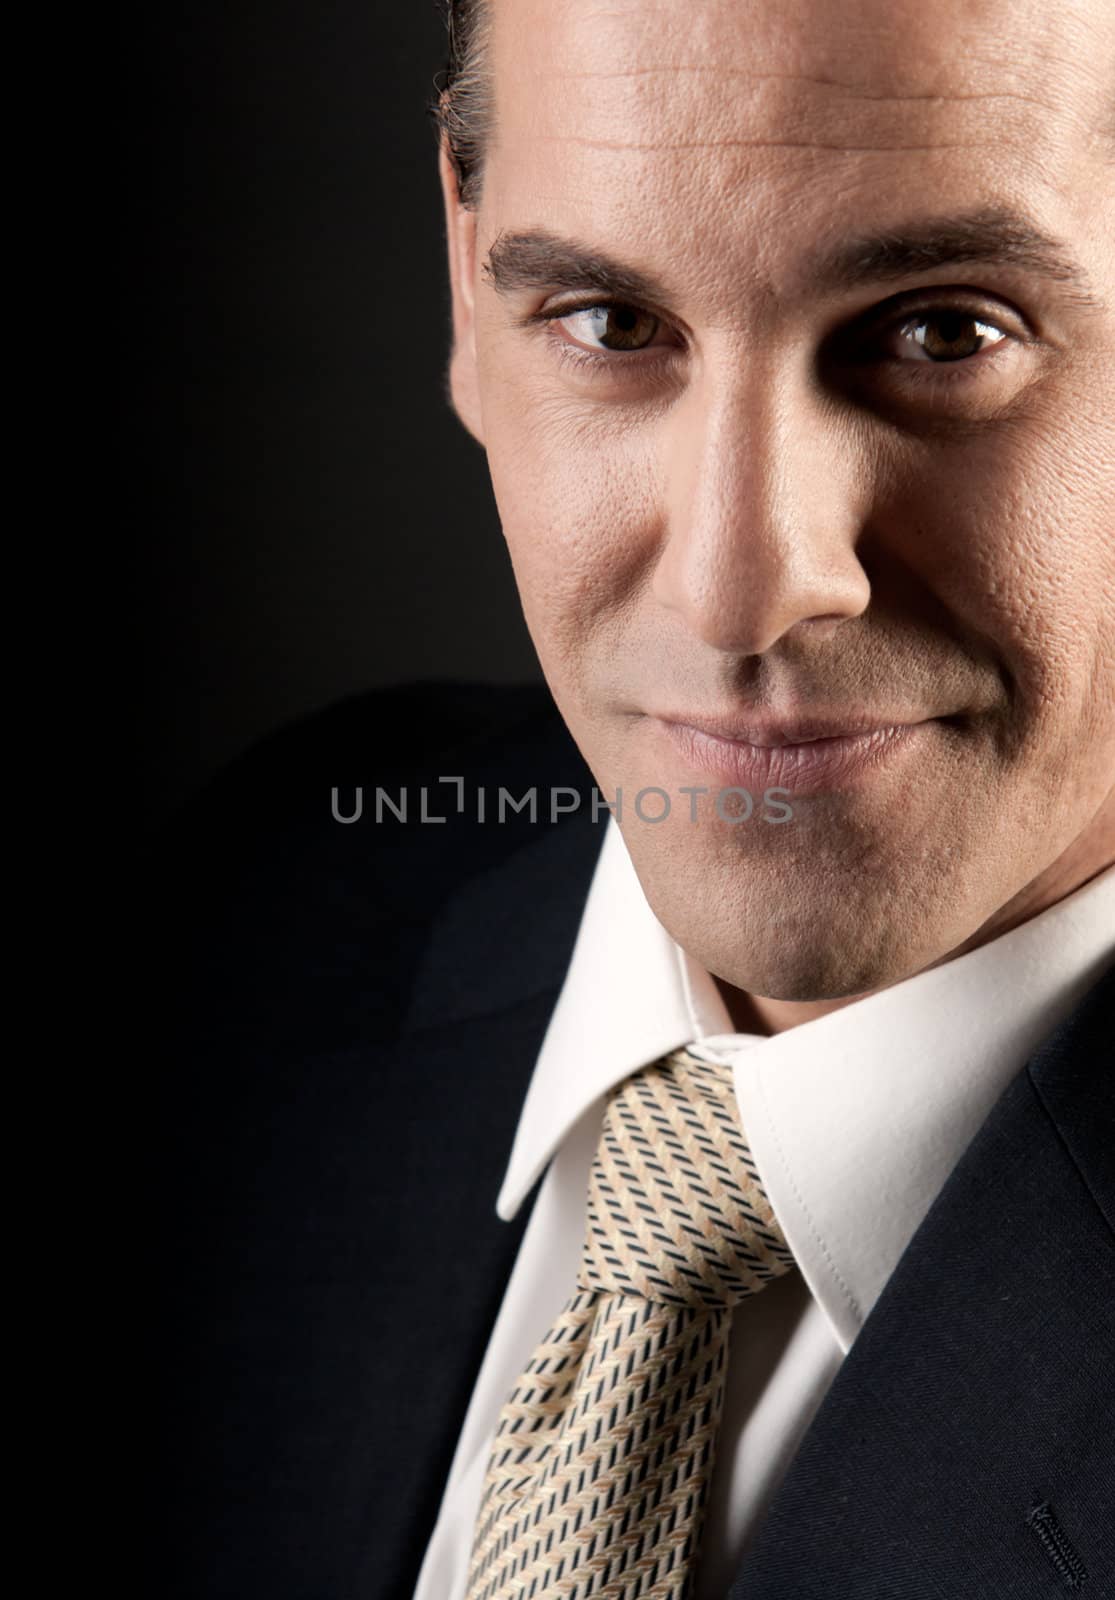 Adult businessman close-up portrait smiling on dark background. by dgmata